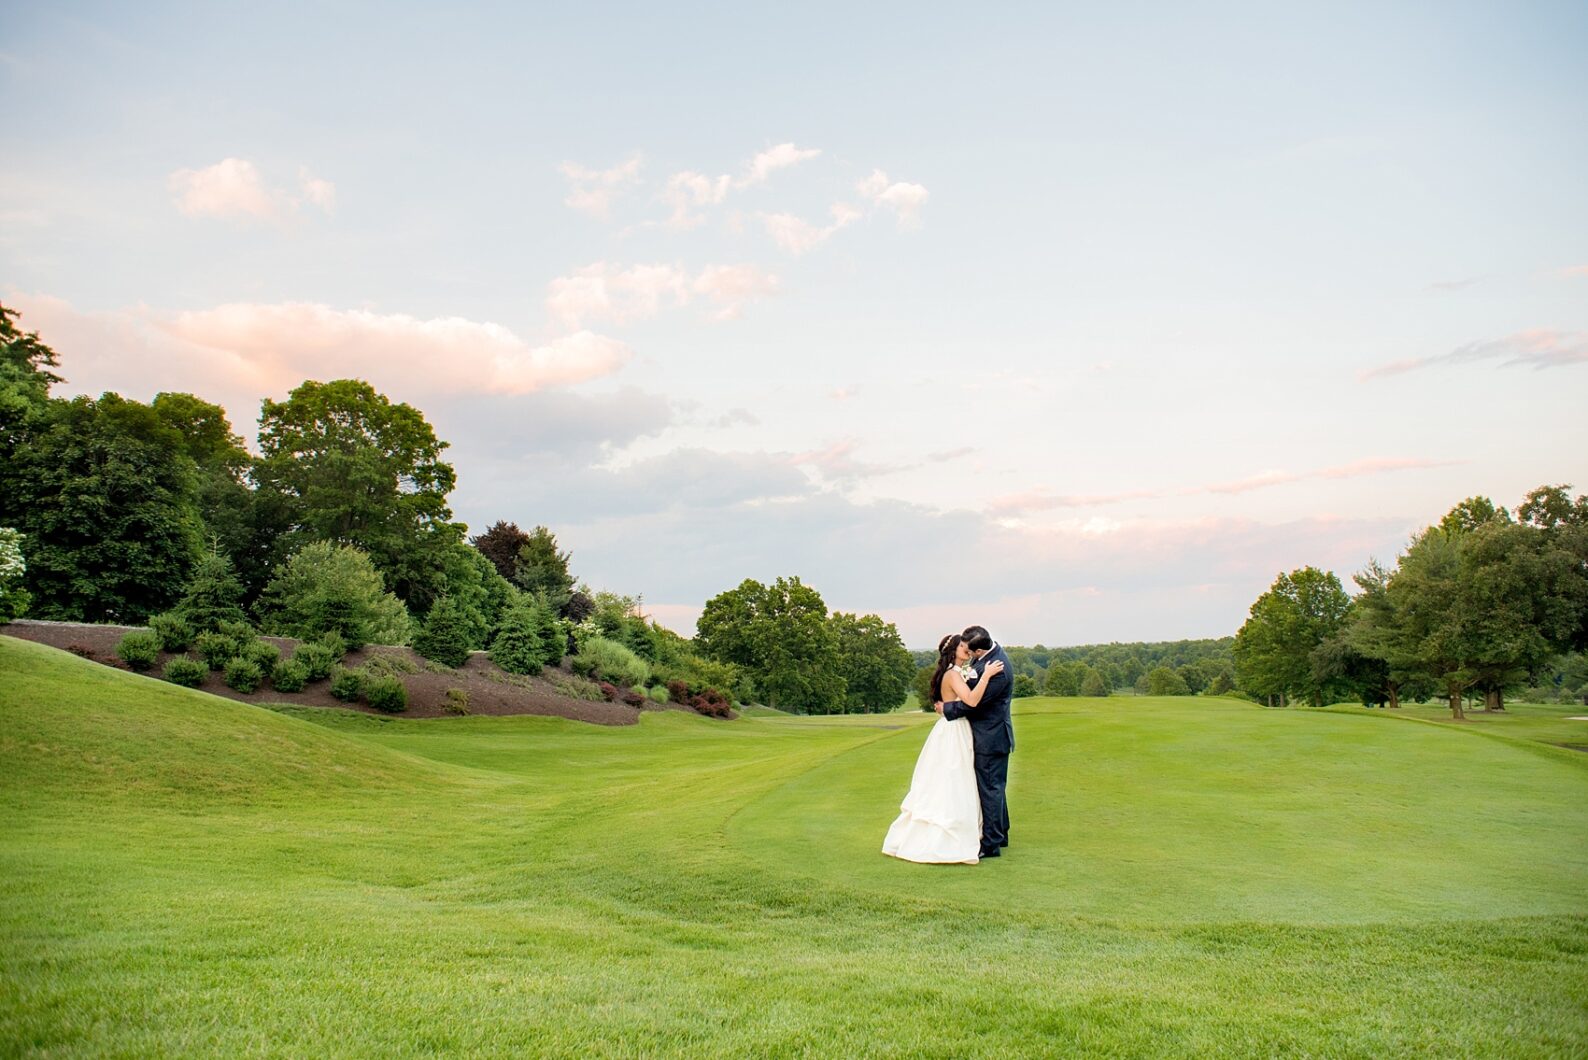 Mikkel Paige Photography photos from a wedding at Basking Ridge Country Club, NJ. The bride in a halter Amsale gown and groom in a navy blue suit kiss at a picturesque pink and blue sunset on the golf course.